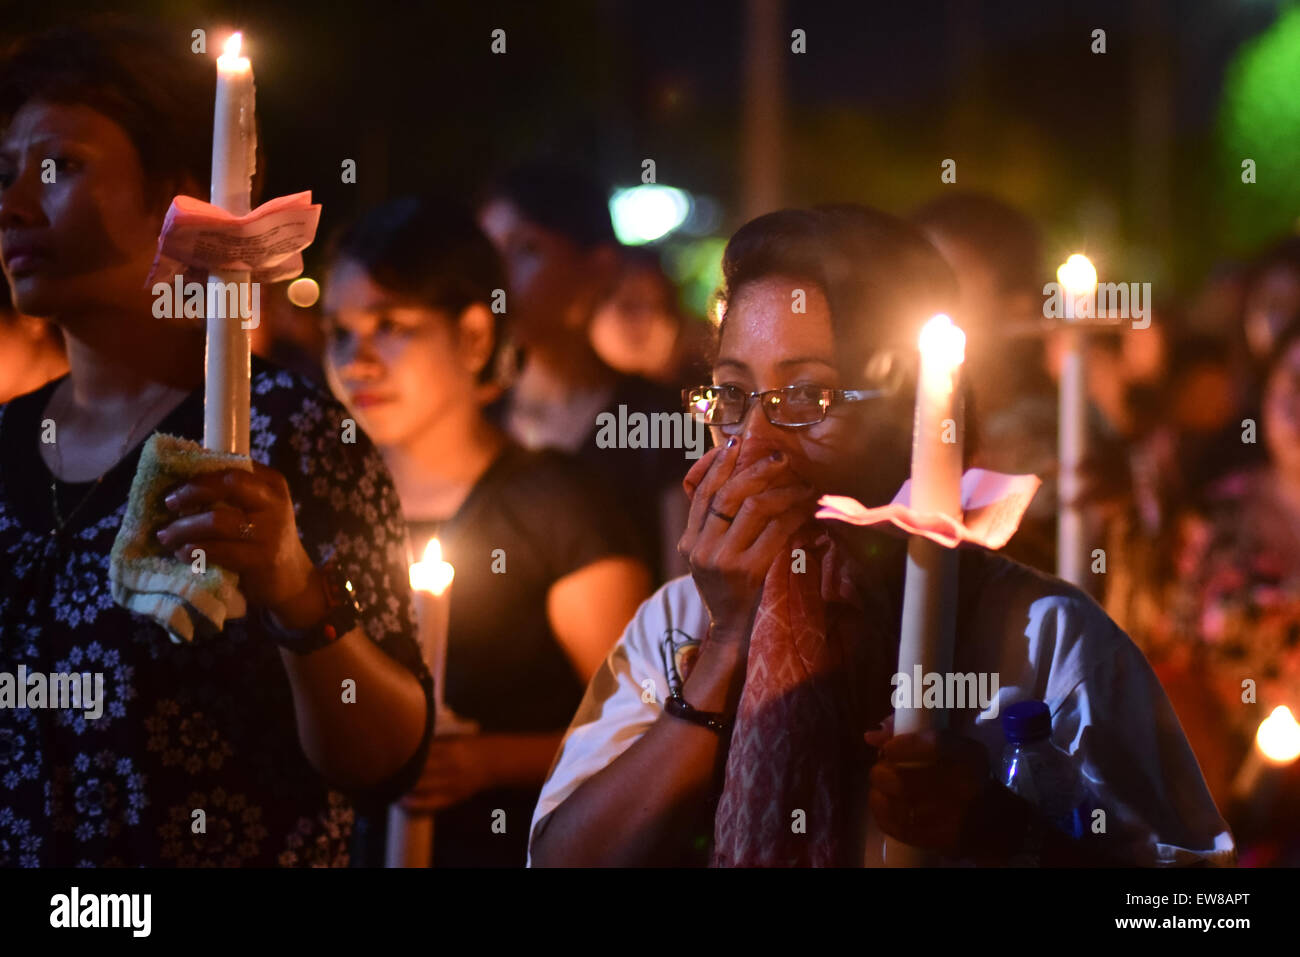 Women pilgrims bring lit candles as they are marching during a procession to commemorate Good Friday in Larantuka, East Nusa Tenggara, Indonesia. Stock Photo